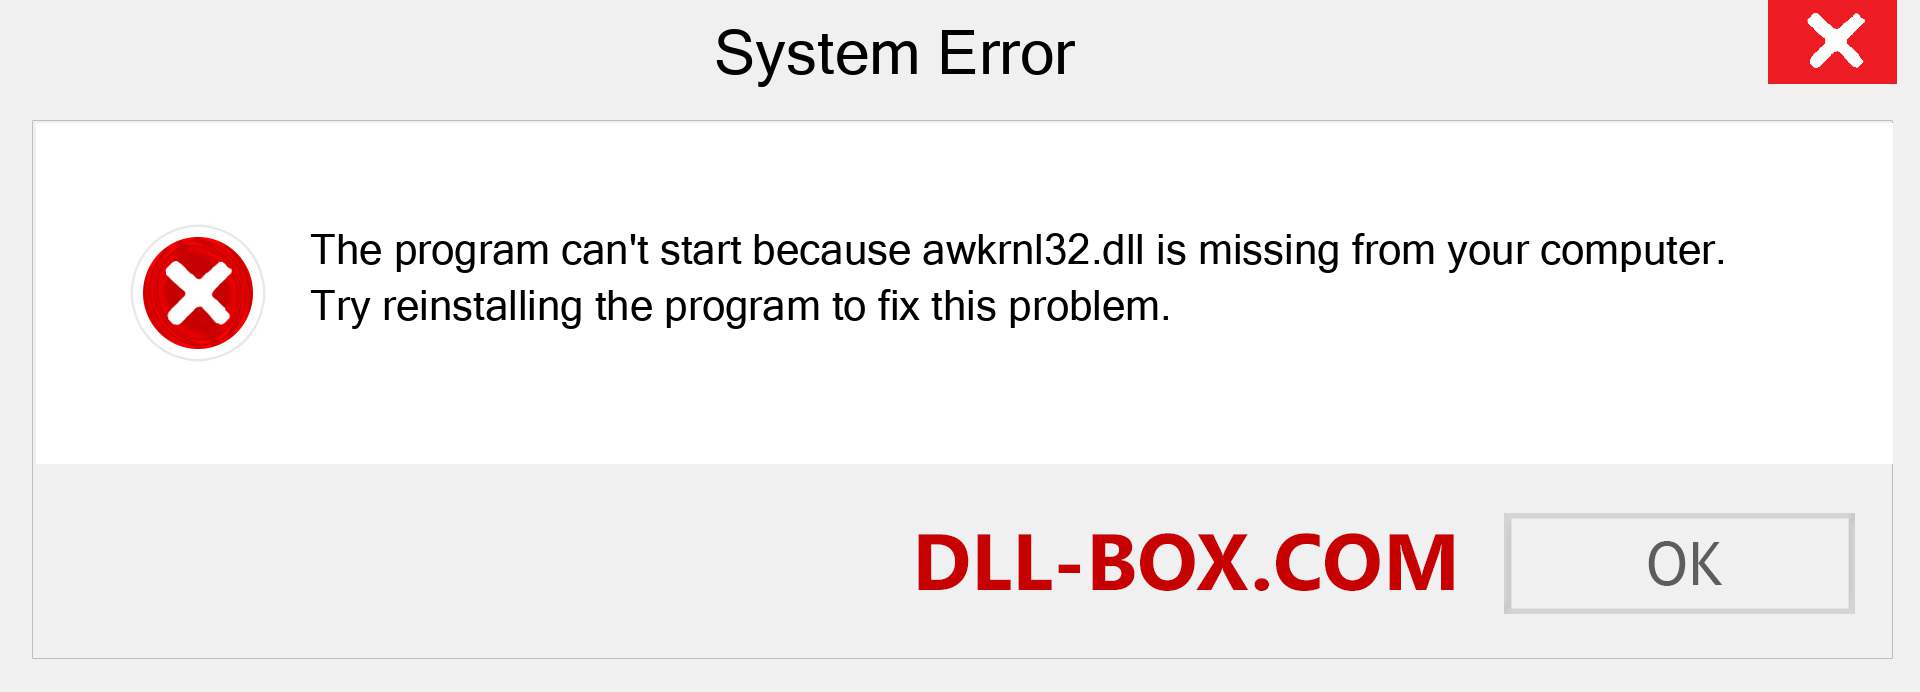  awkrnl32.dll file is missing?. Download for Windows 7, 8, 10 - Fix  awkrnl32 dll Missing Error on Windows, photos, images